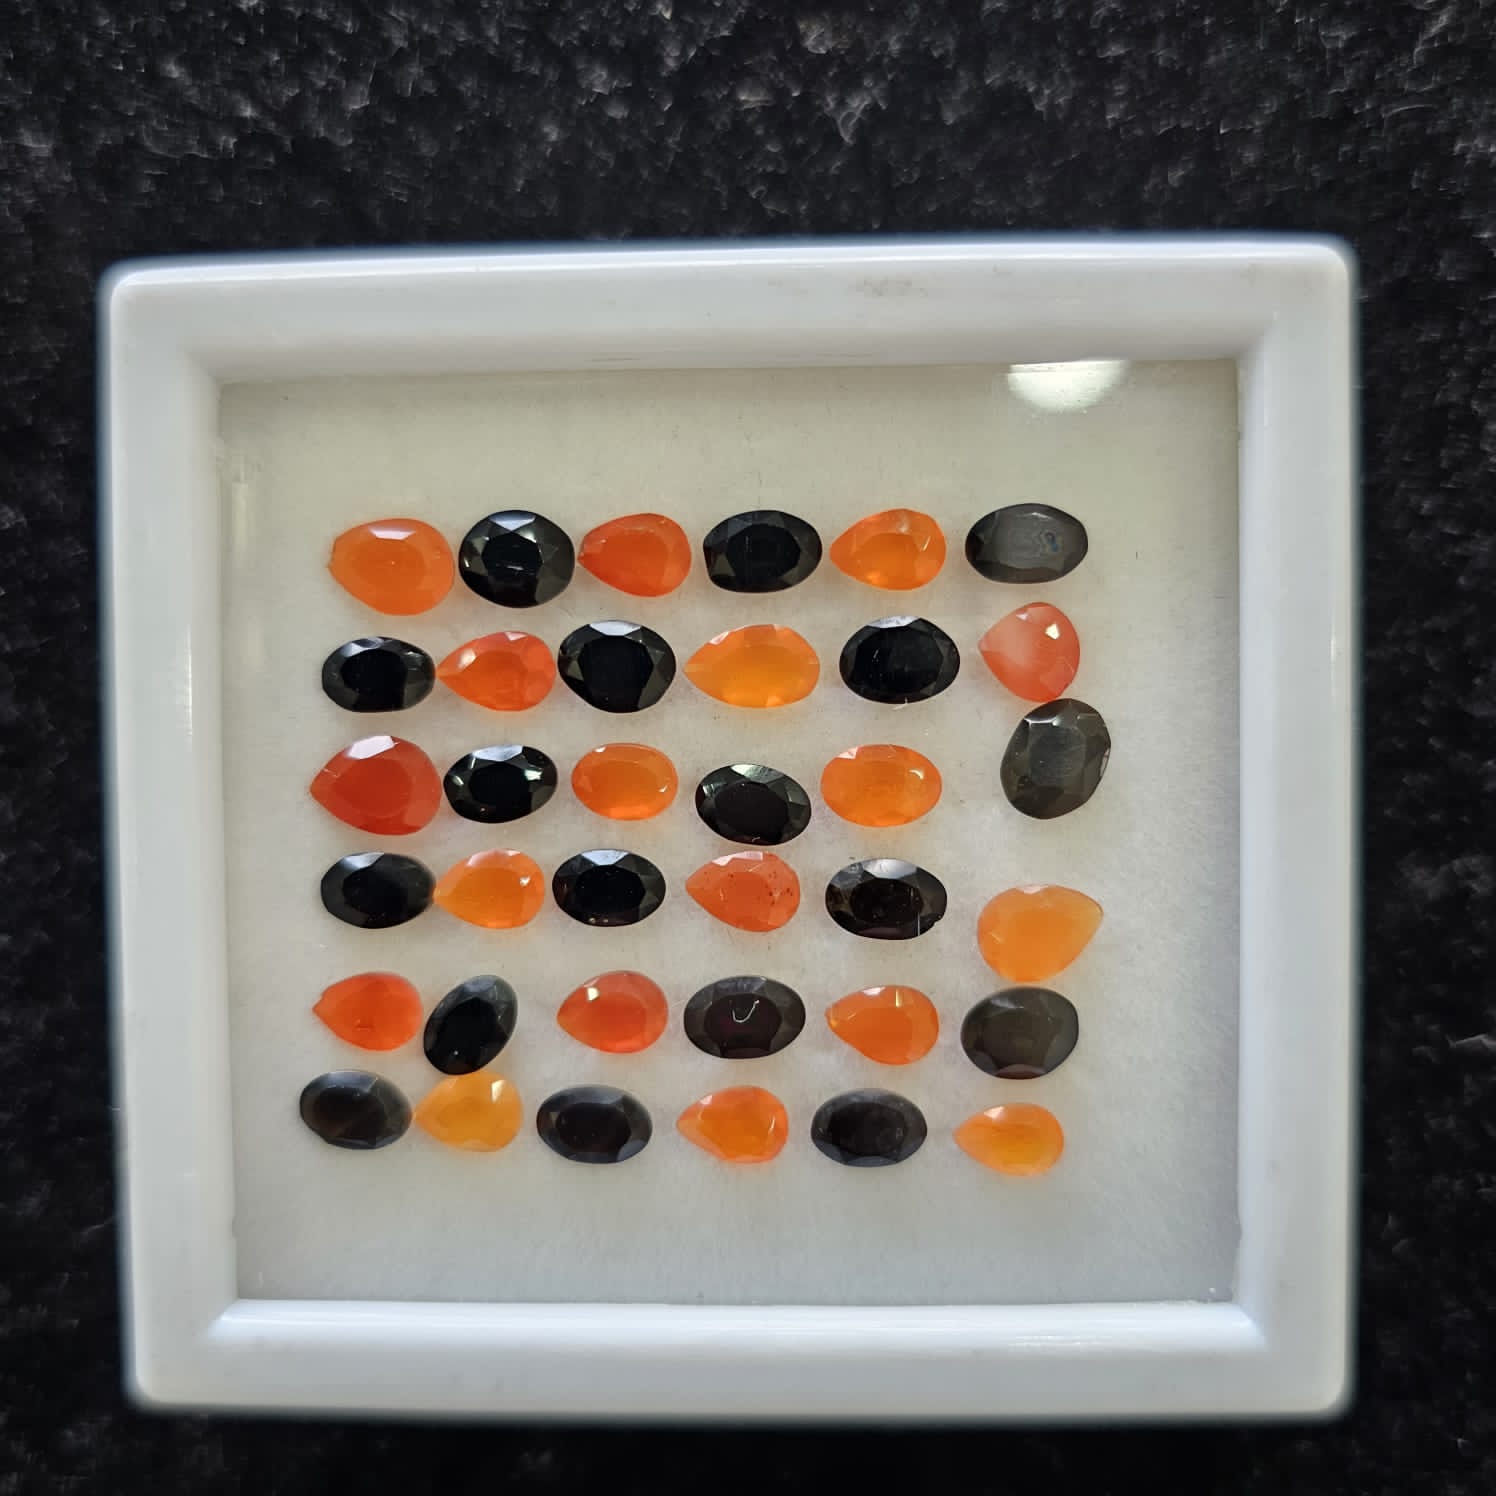 36pcs Natural Black & Orange Onyx Faceted Ovals and Pears Gemstone 6x4mm - The LabradoriteKing